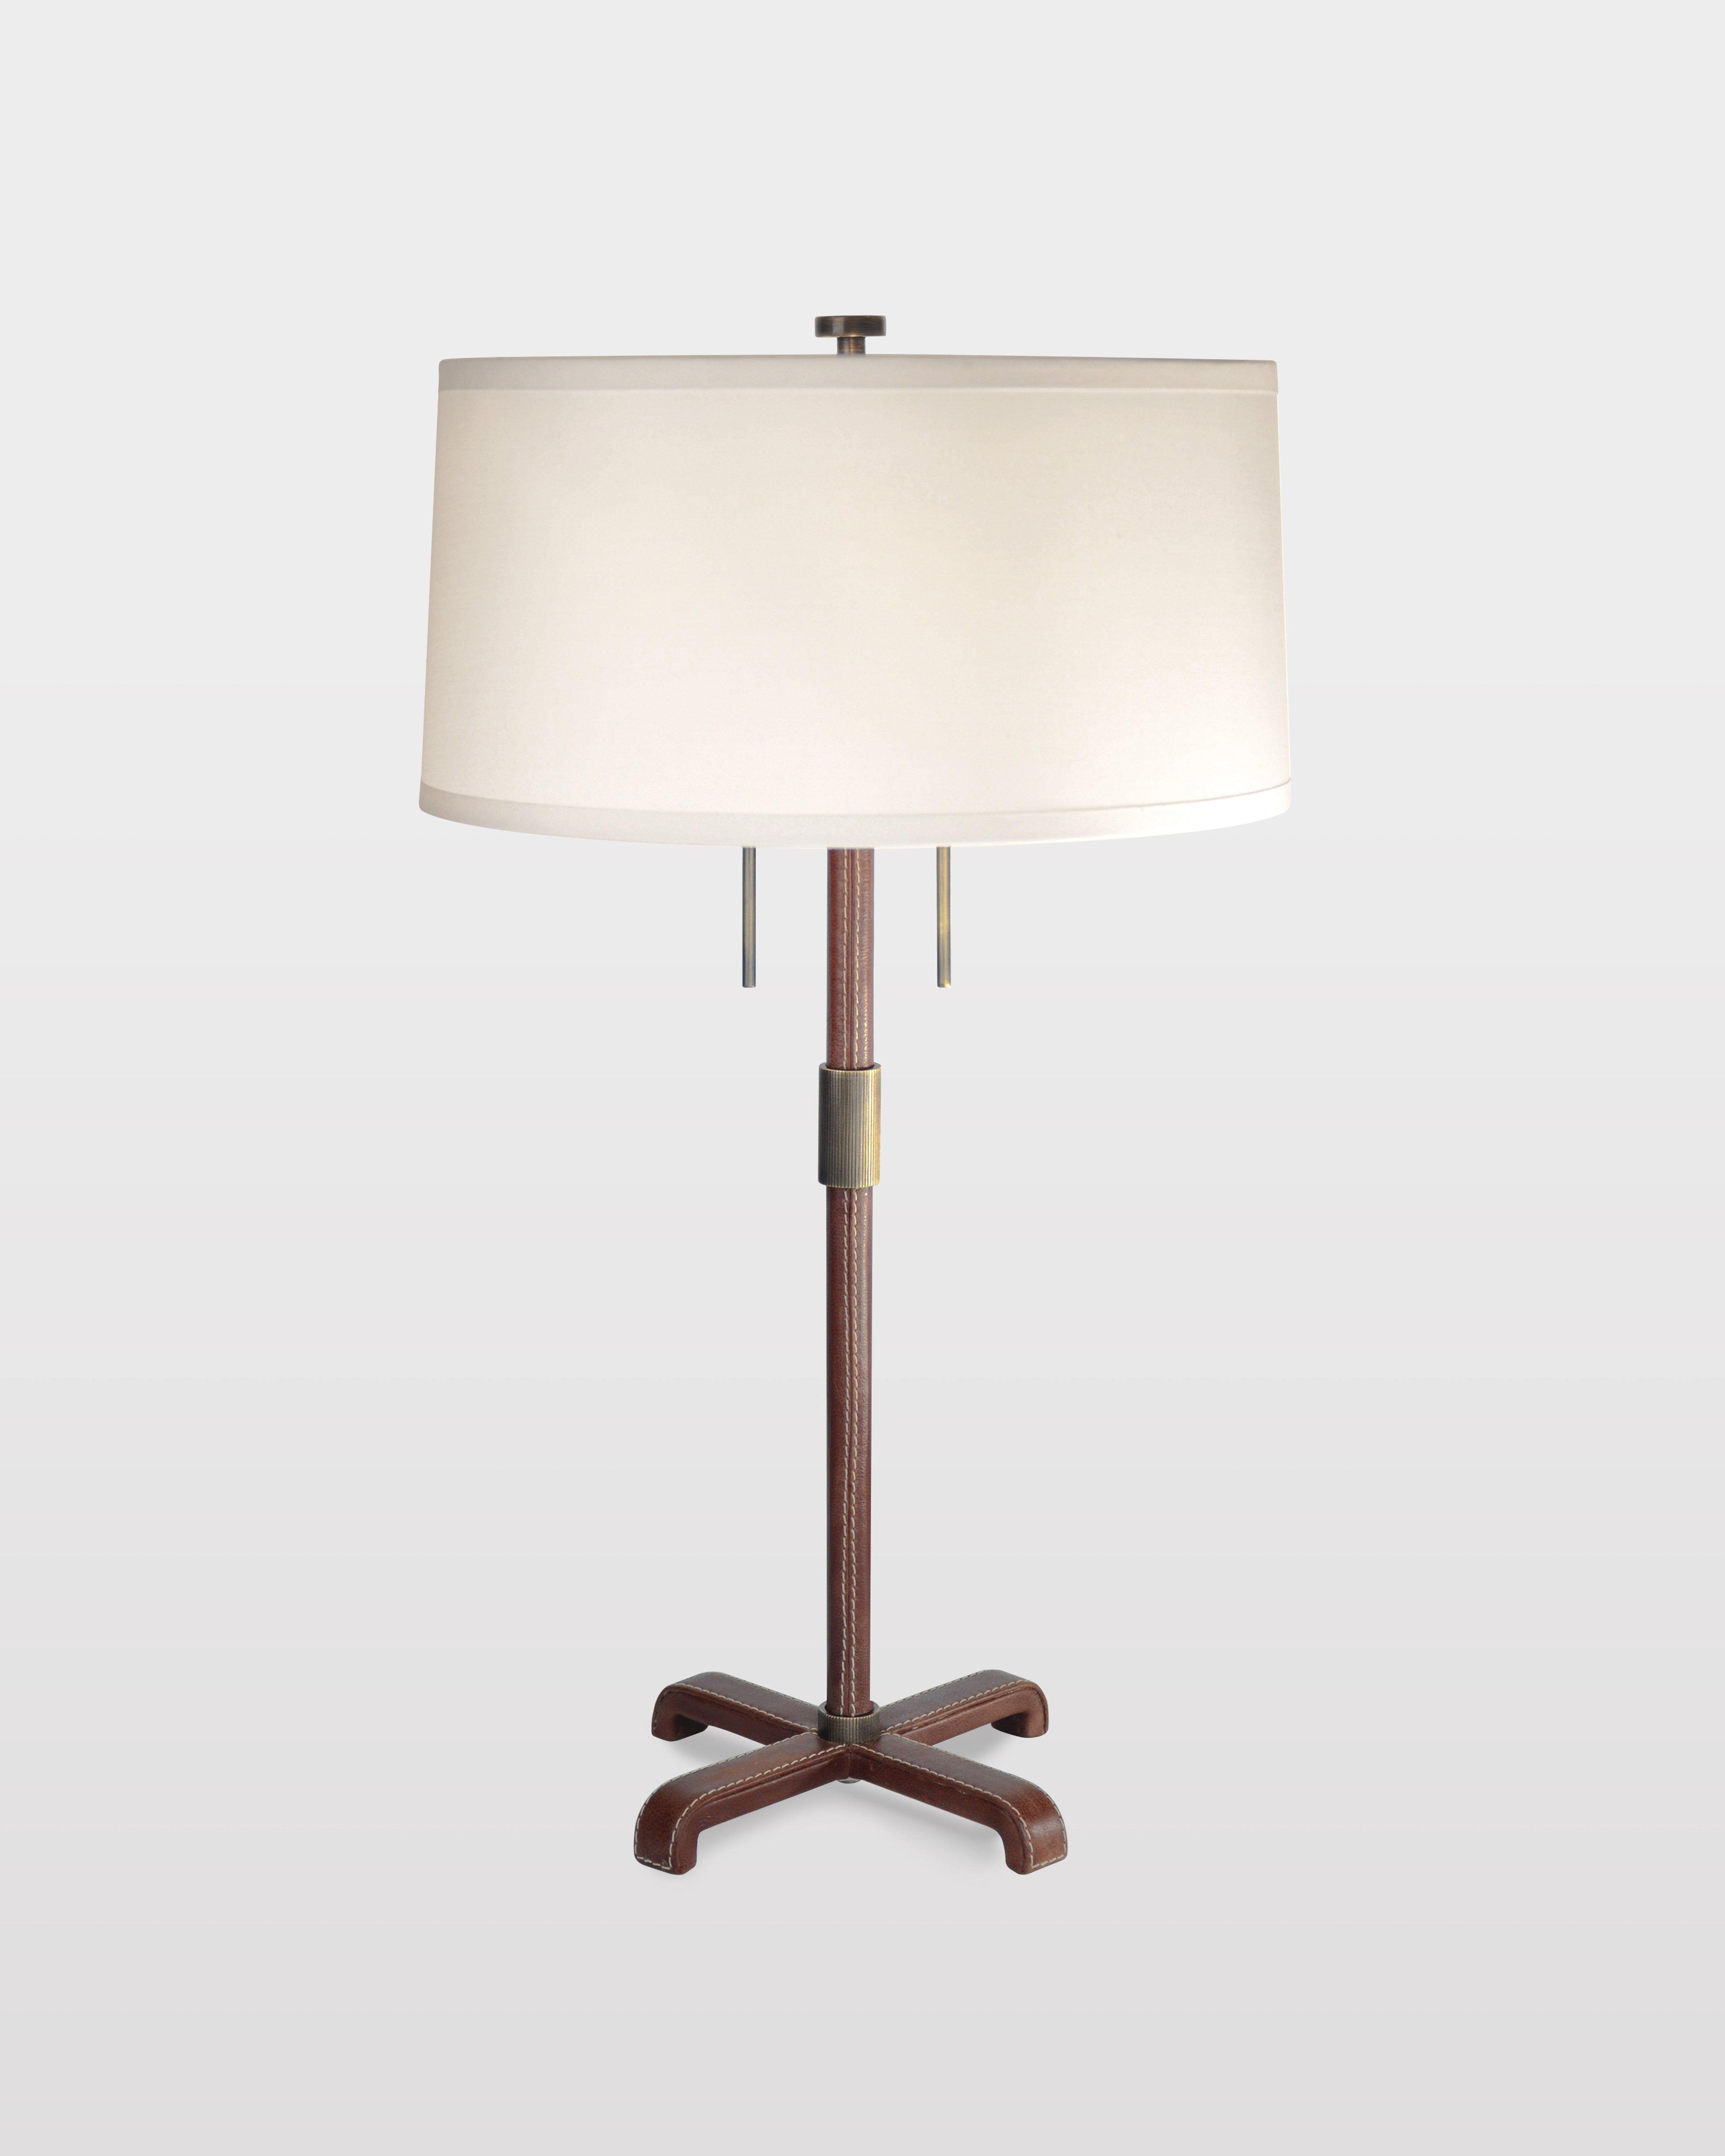 Light Antique Brass with Brown Leather and White Silk Pongee